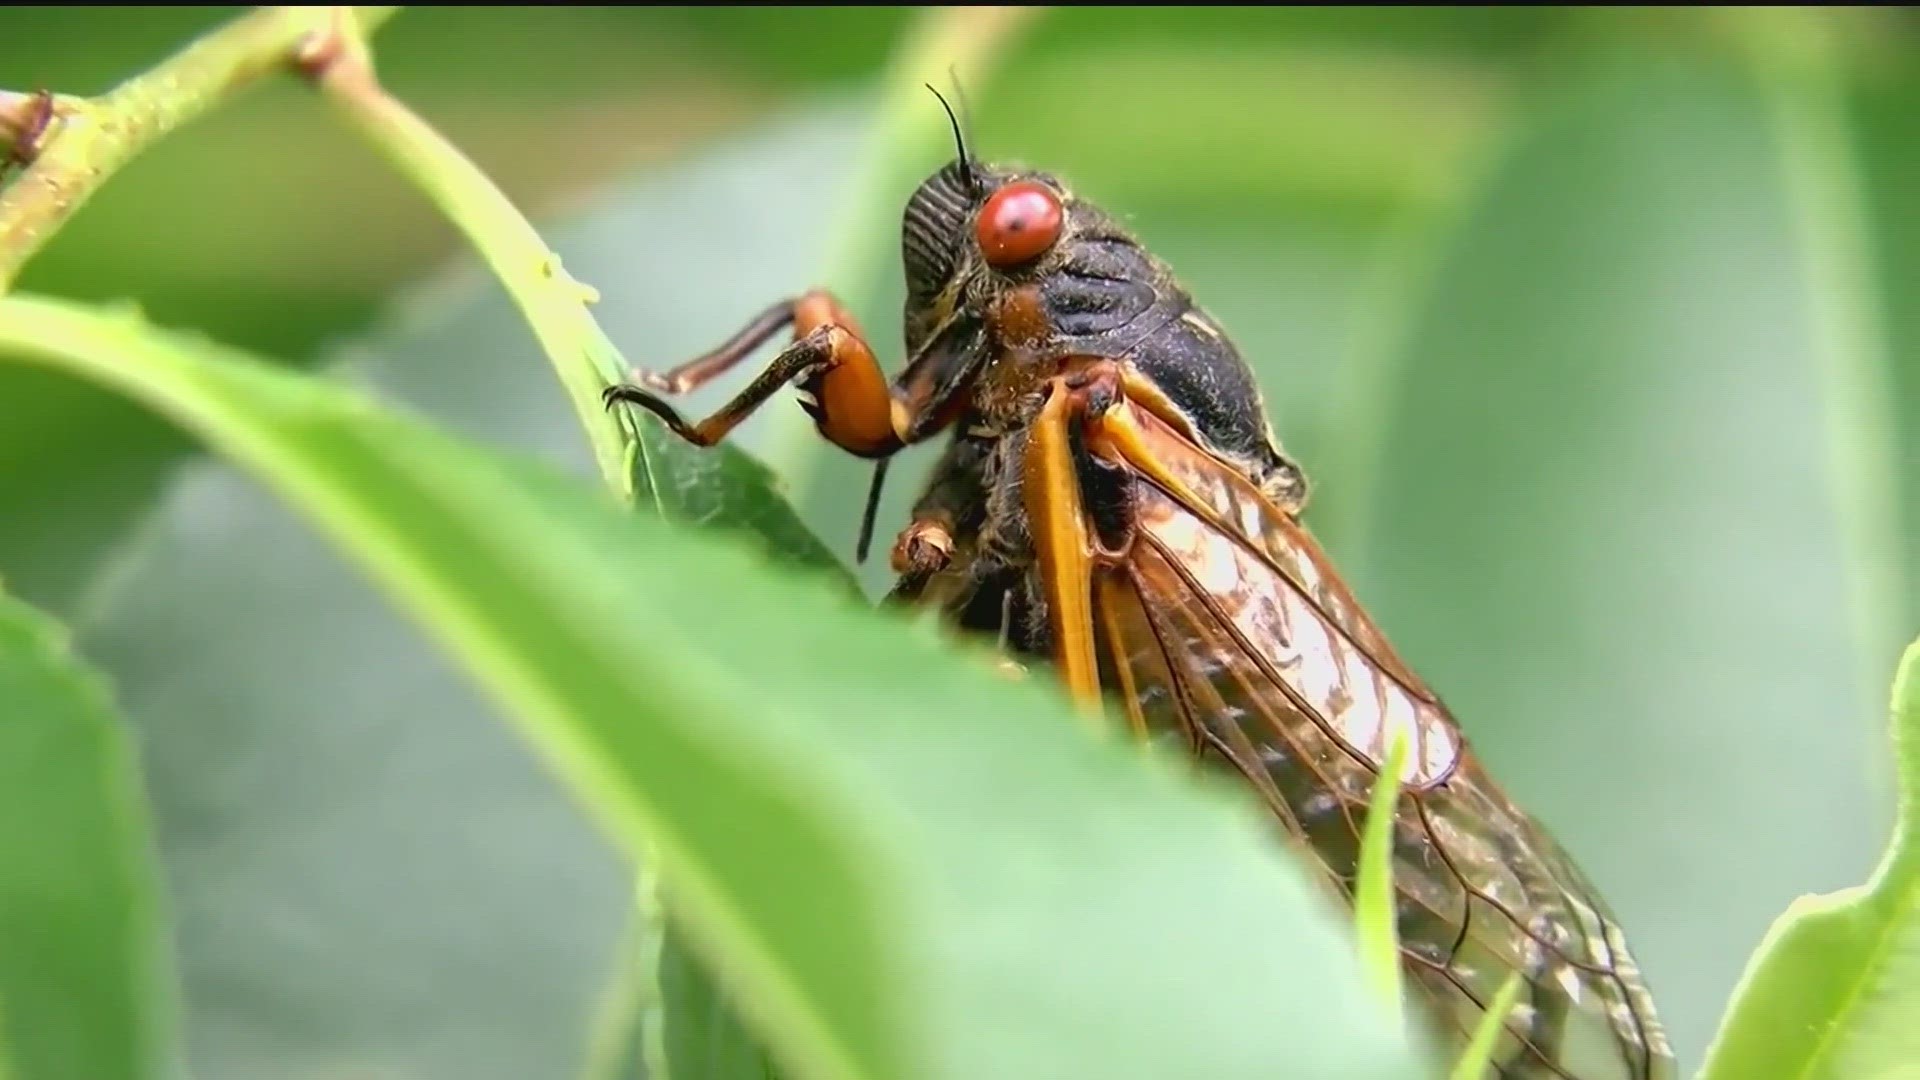 The cicadas will soon emerge. There could be more of them than the world has seen in 200 years.